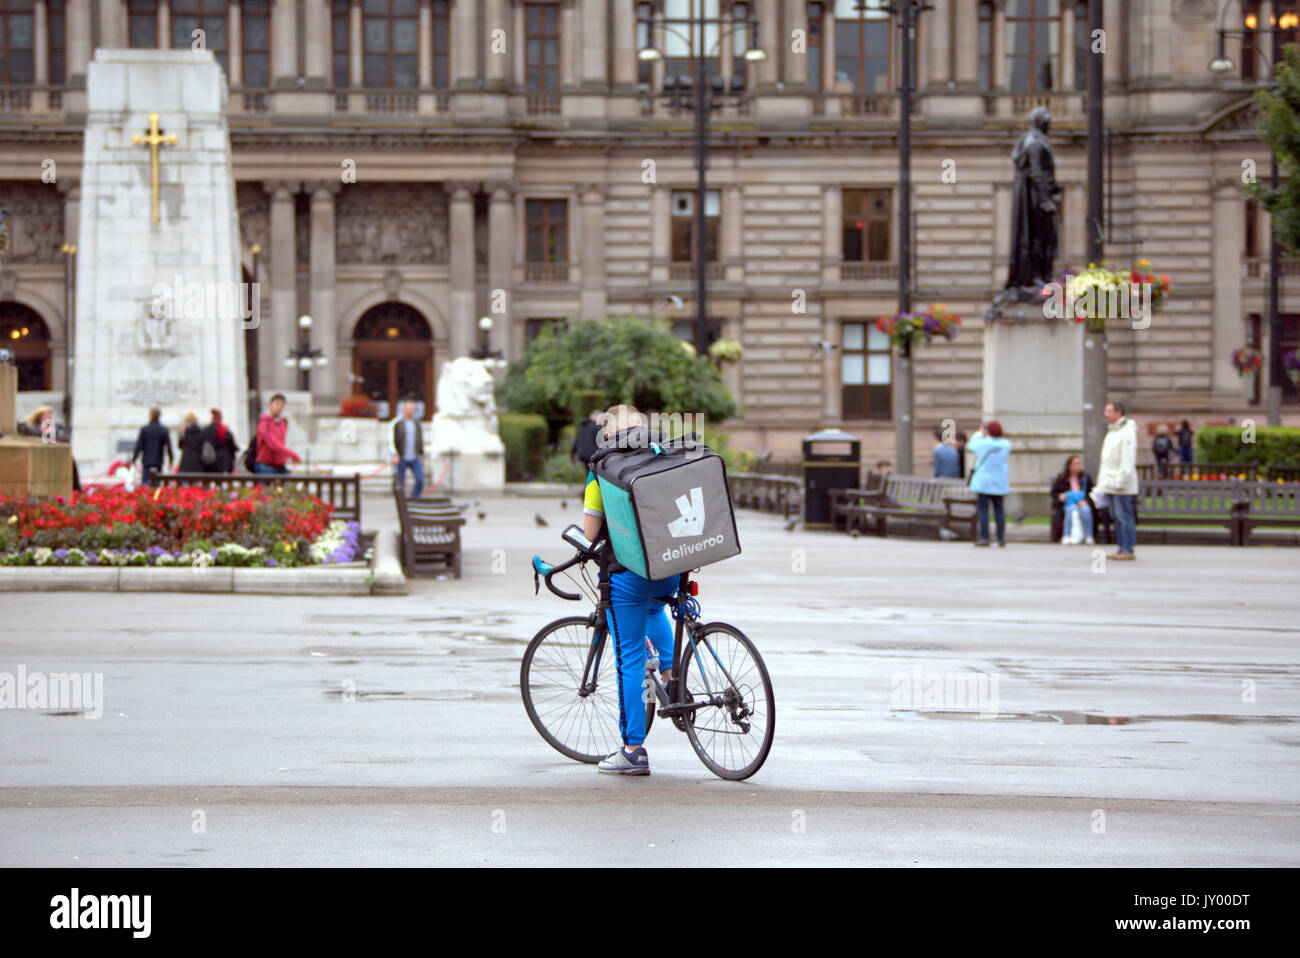 wet George square Glasgow young man boy delivery bike cyclist Deliveroo food delivery texting waiting for job delivering outside on street road Stock Photo